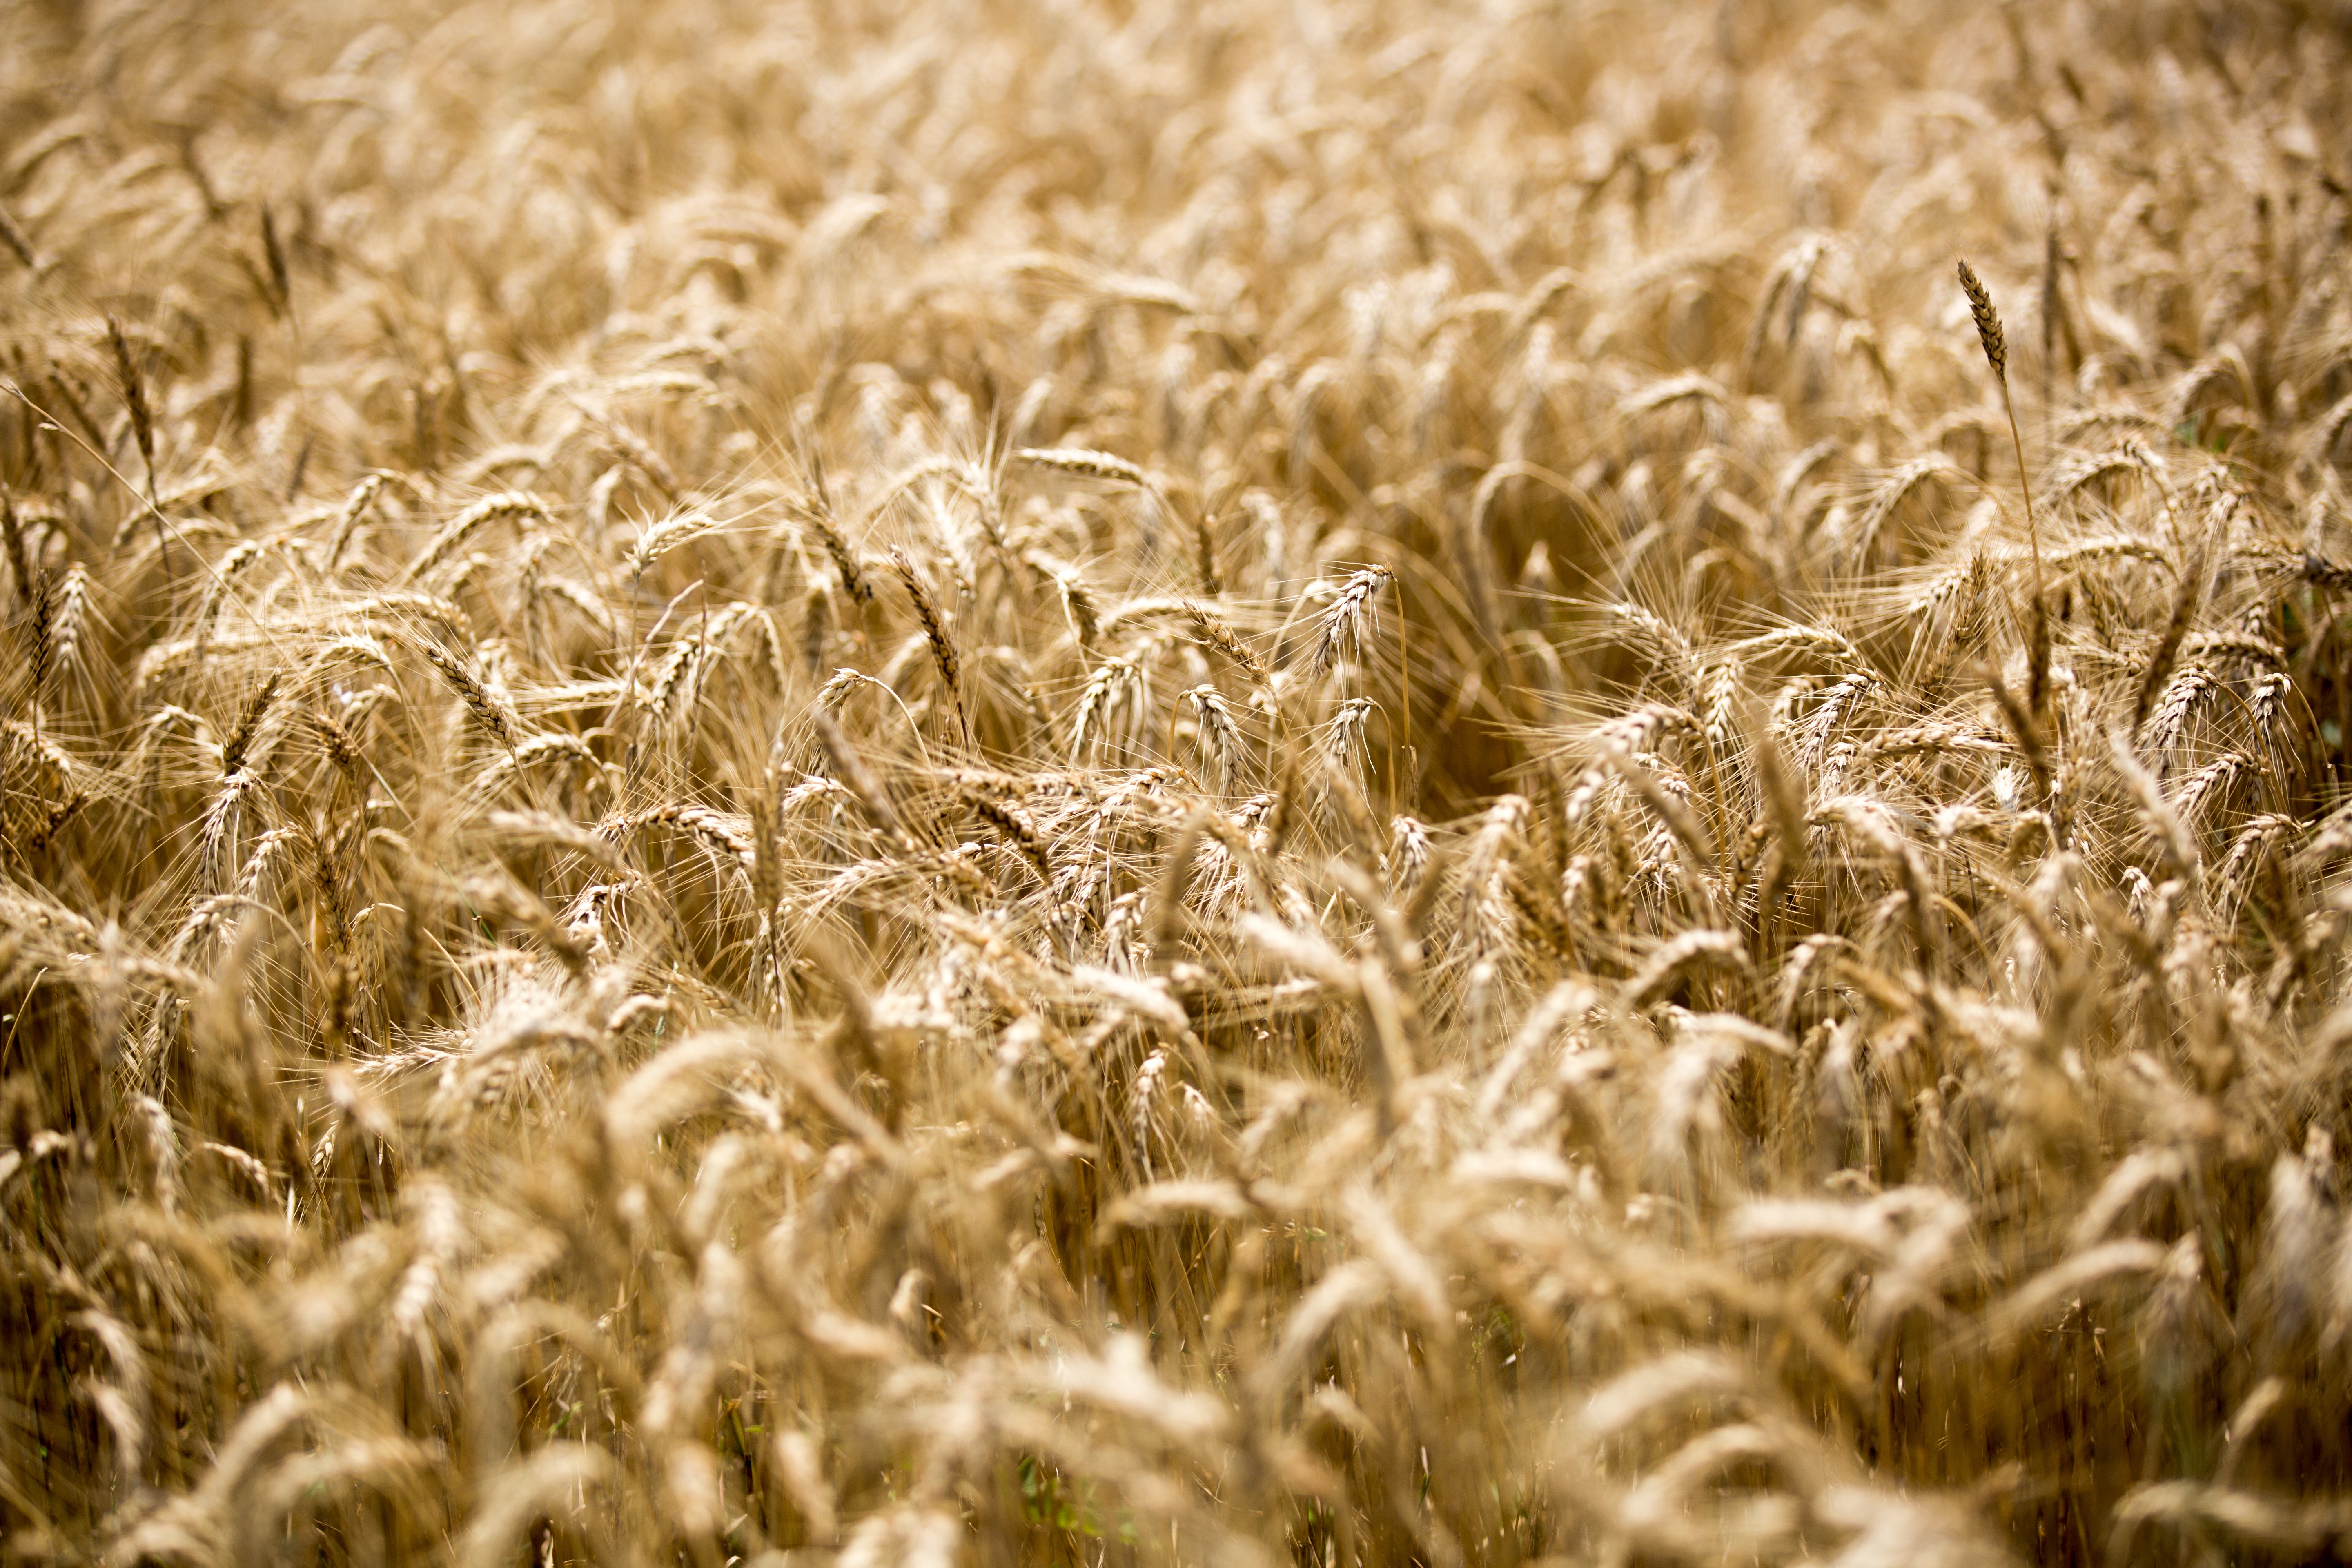 Wheat ready to harvest.